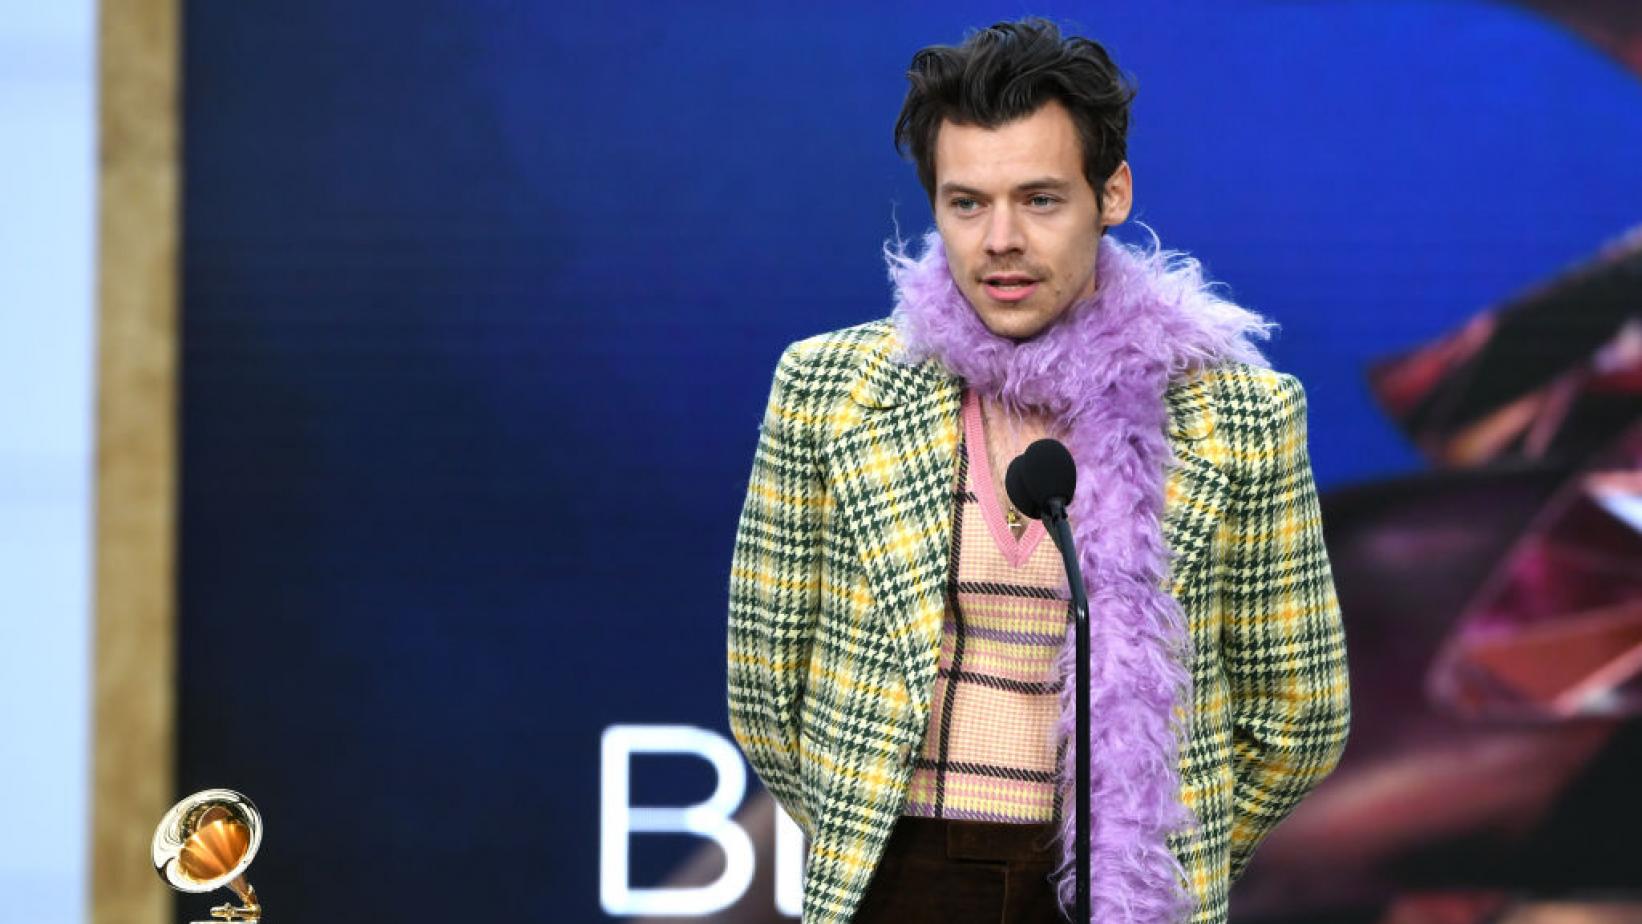  Harry Styles wears Gucci at the 2021 Grammy Awards. Image via Getty Images.